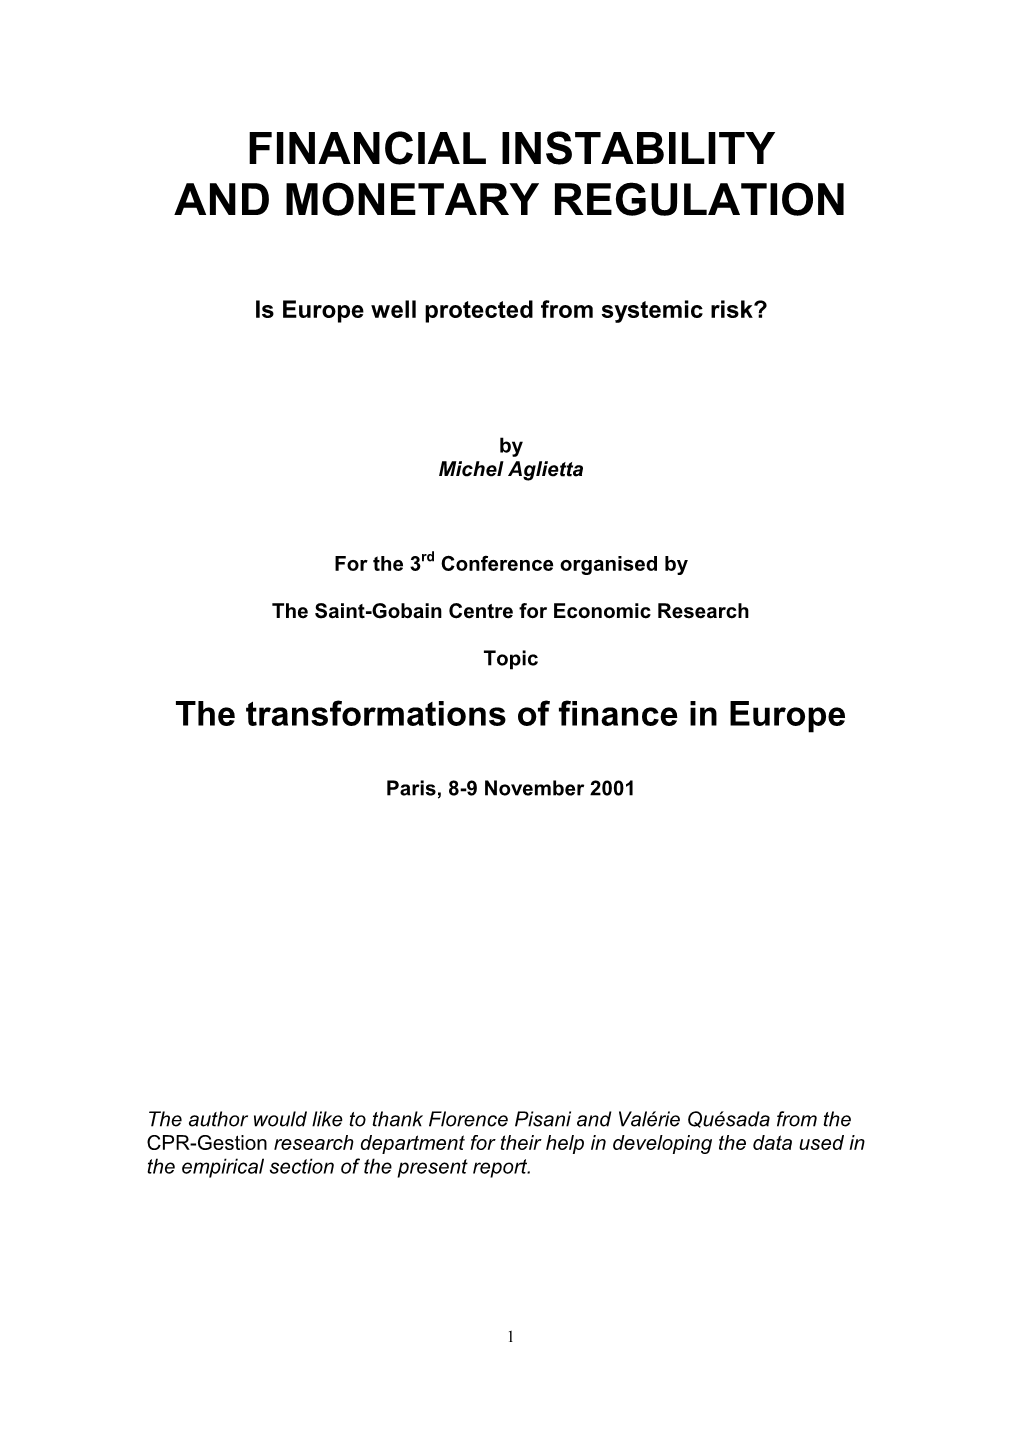 Financial Instability and Monetary Regulation